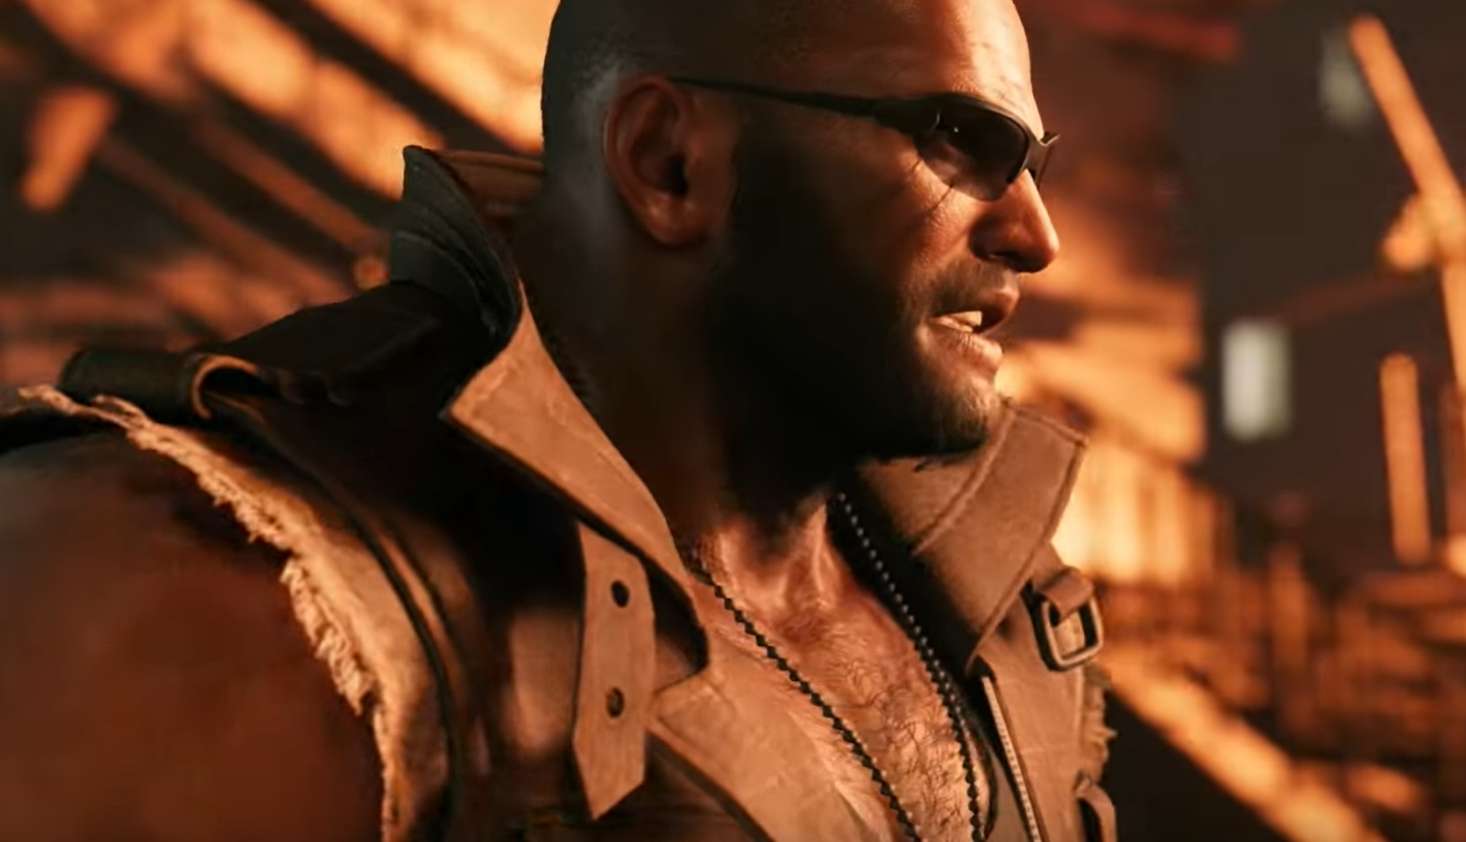 New Final Fantasy VII Remake Character Trailer Highlights Barret Wallace, The Leader Of AVALANCHE